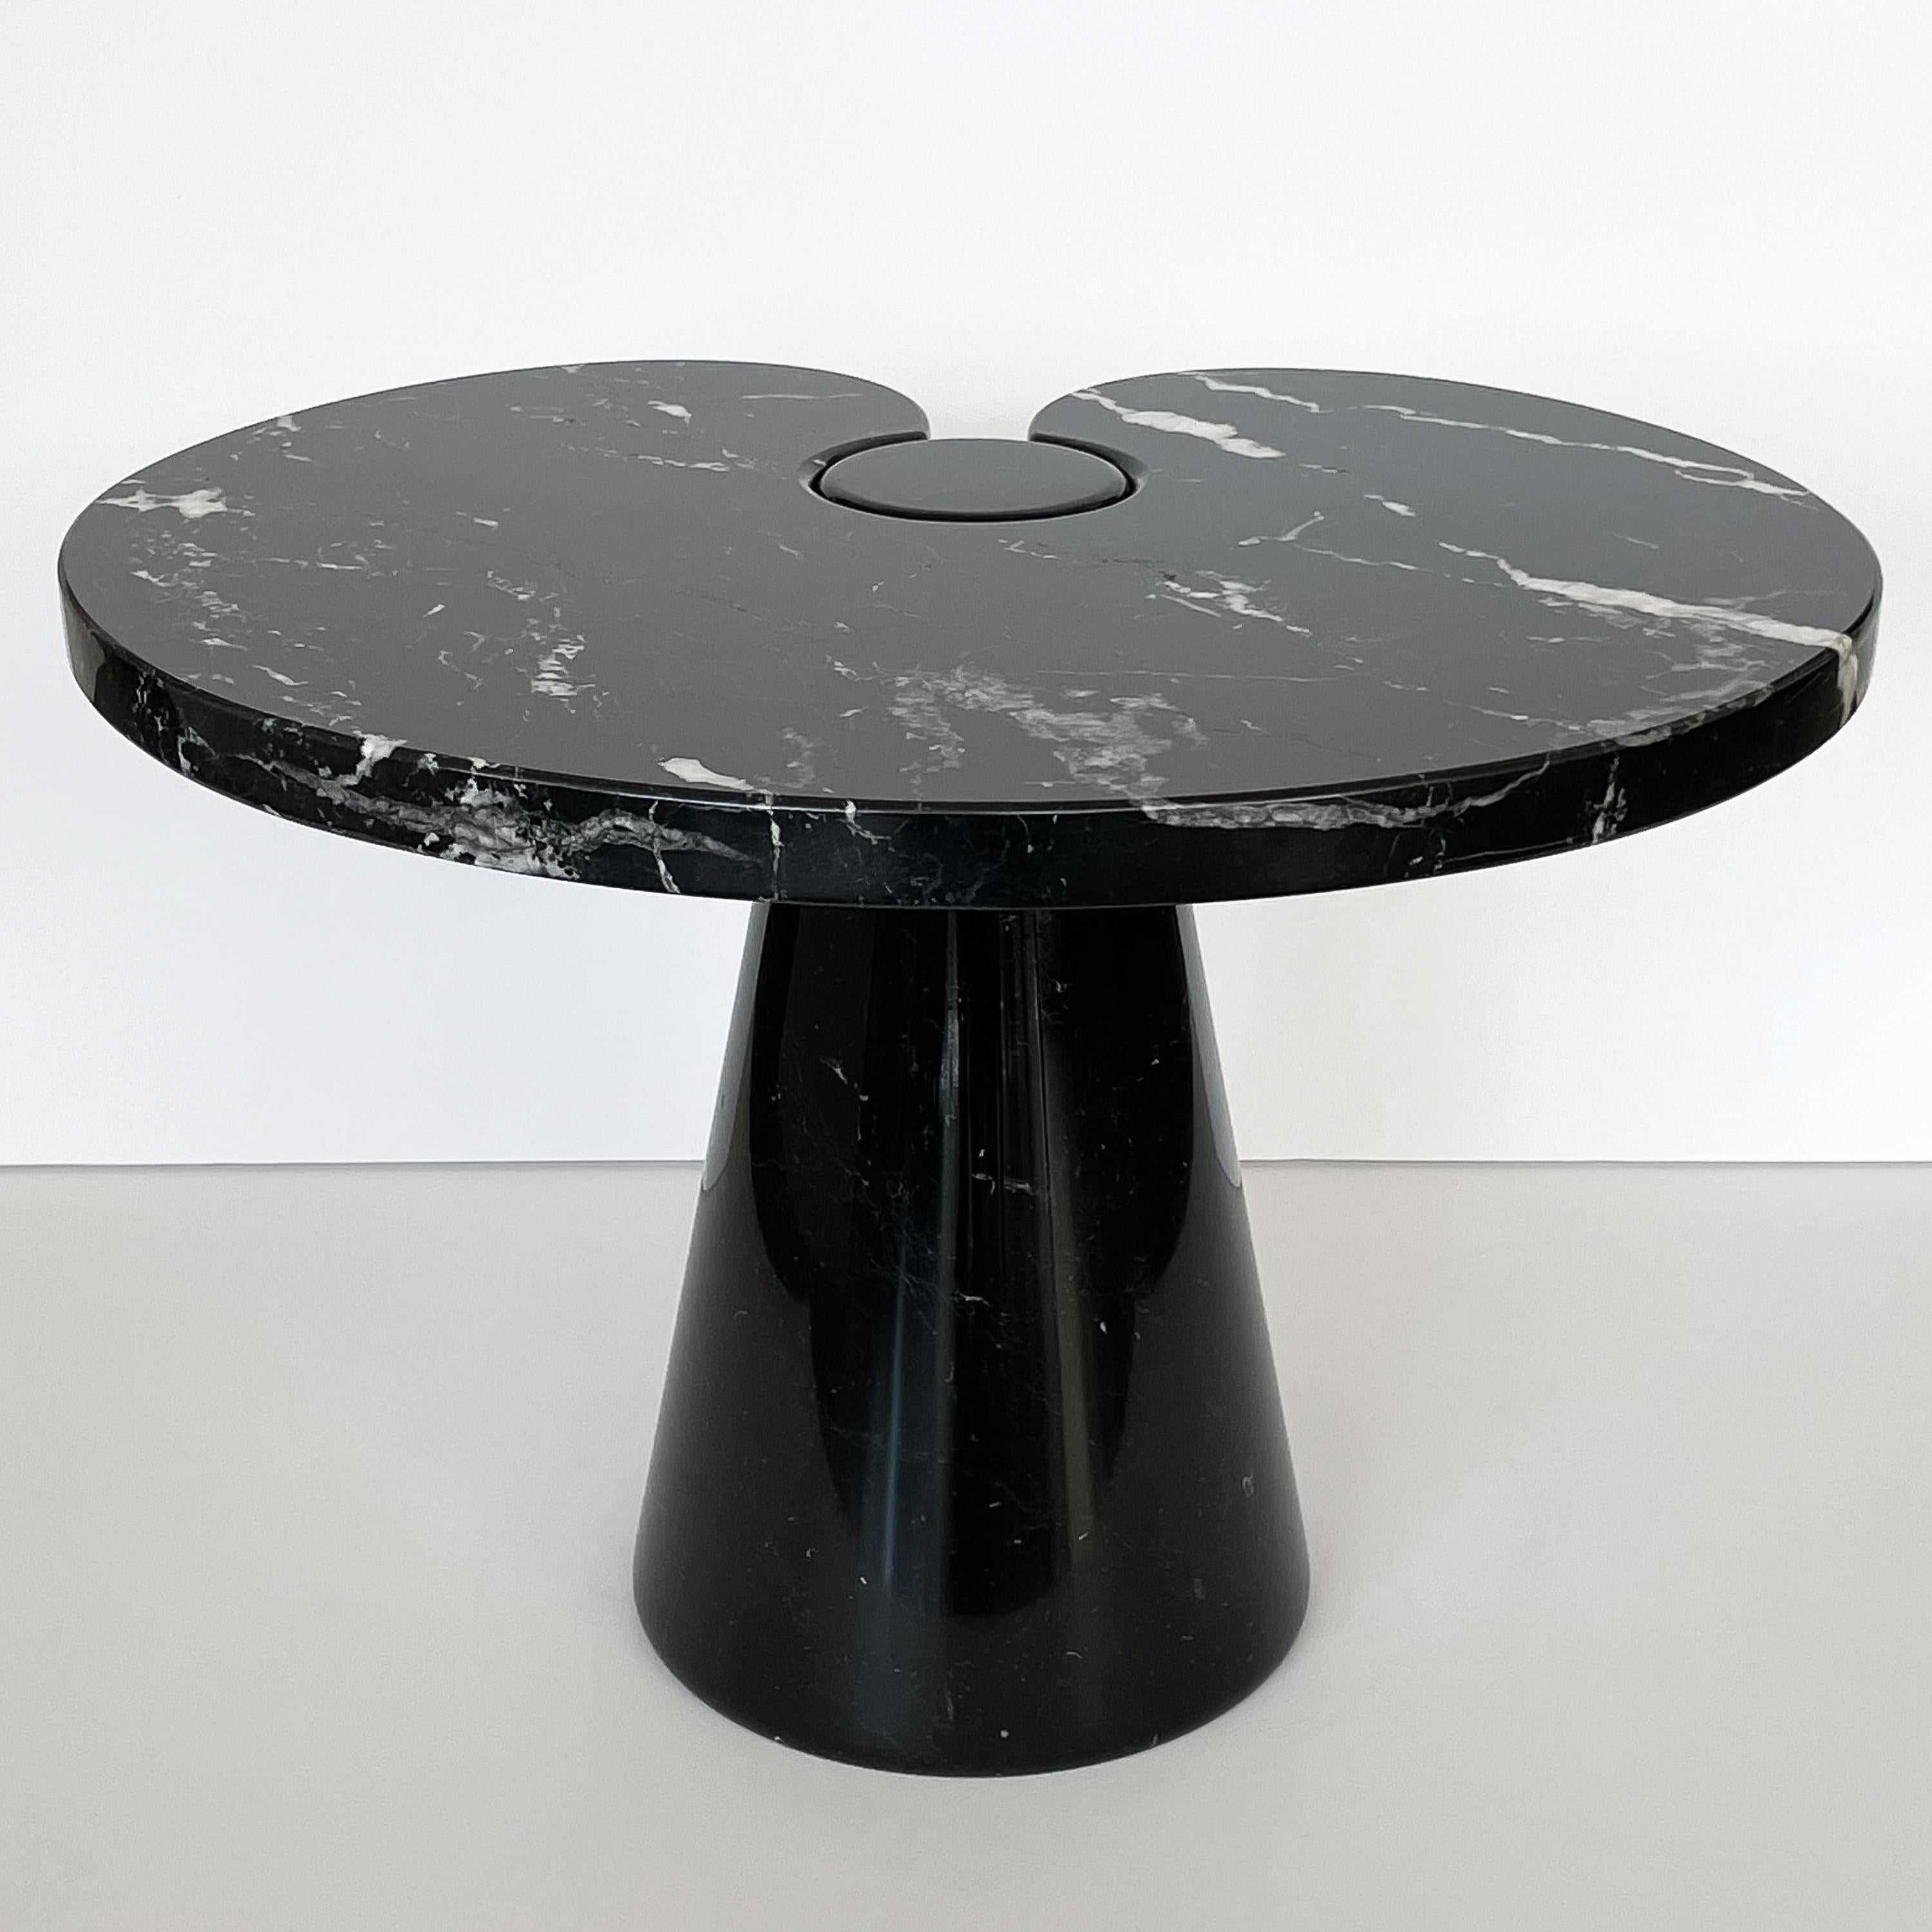 A short Eros side table in black Nero Marquina marble by Italian architect Angelo Mangiarotti for Skipper, Italy 1970s. Black marble / Nero Marqina with striking white veining in a polished finish. 1 1/8th inch thick fitted top sits on a single